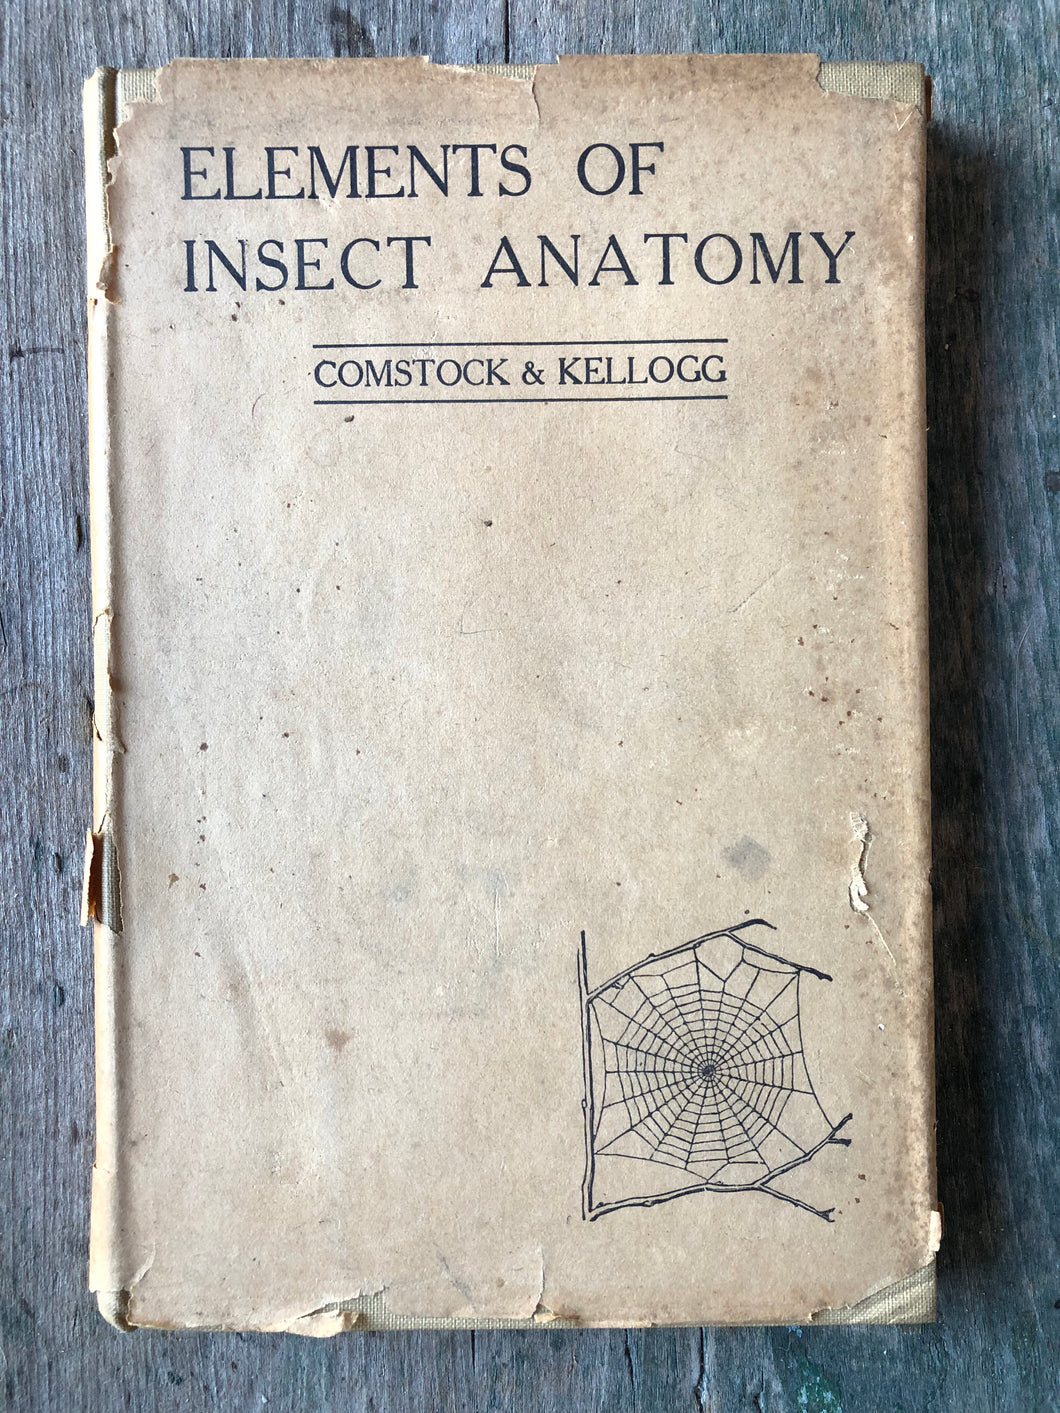 The Elements of Insect Anatomy: An Outline for the Use of Students in Entomological Laboratories by John Henry Comstock and Vernon L. Kellogg